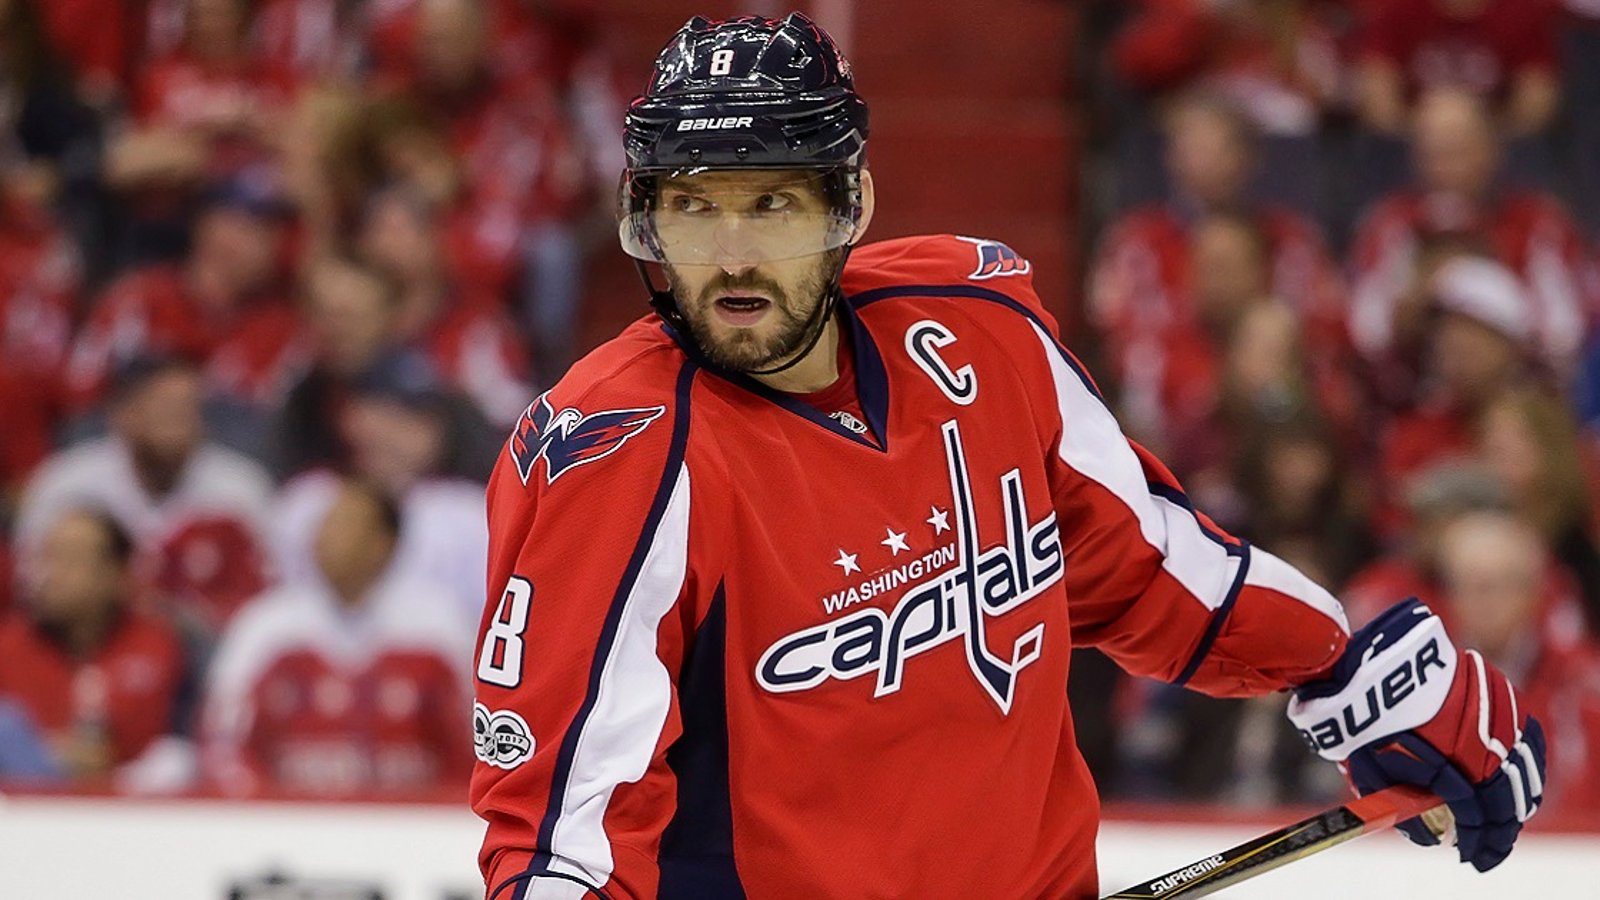 Report: Russian source confirms Ovechkin was playing with two significant injuries.